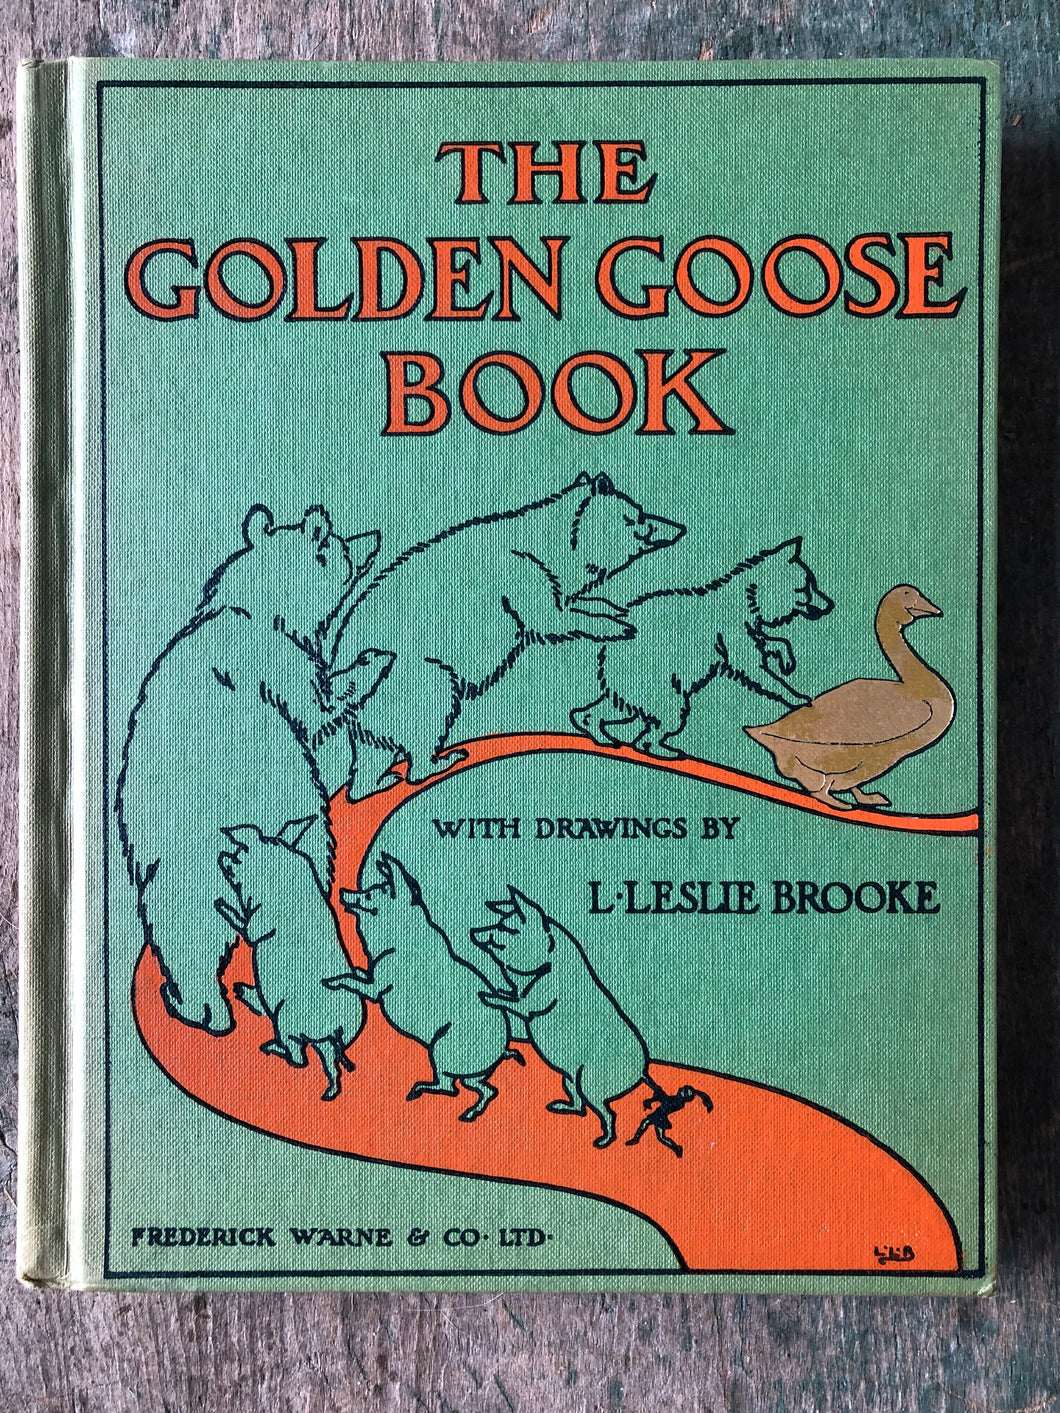 The Golden Goose Book: Being the Stories of The Three Bears, The 3 Little Pigs and Tom Thumb with illustrations by L. Leslie Brooke